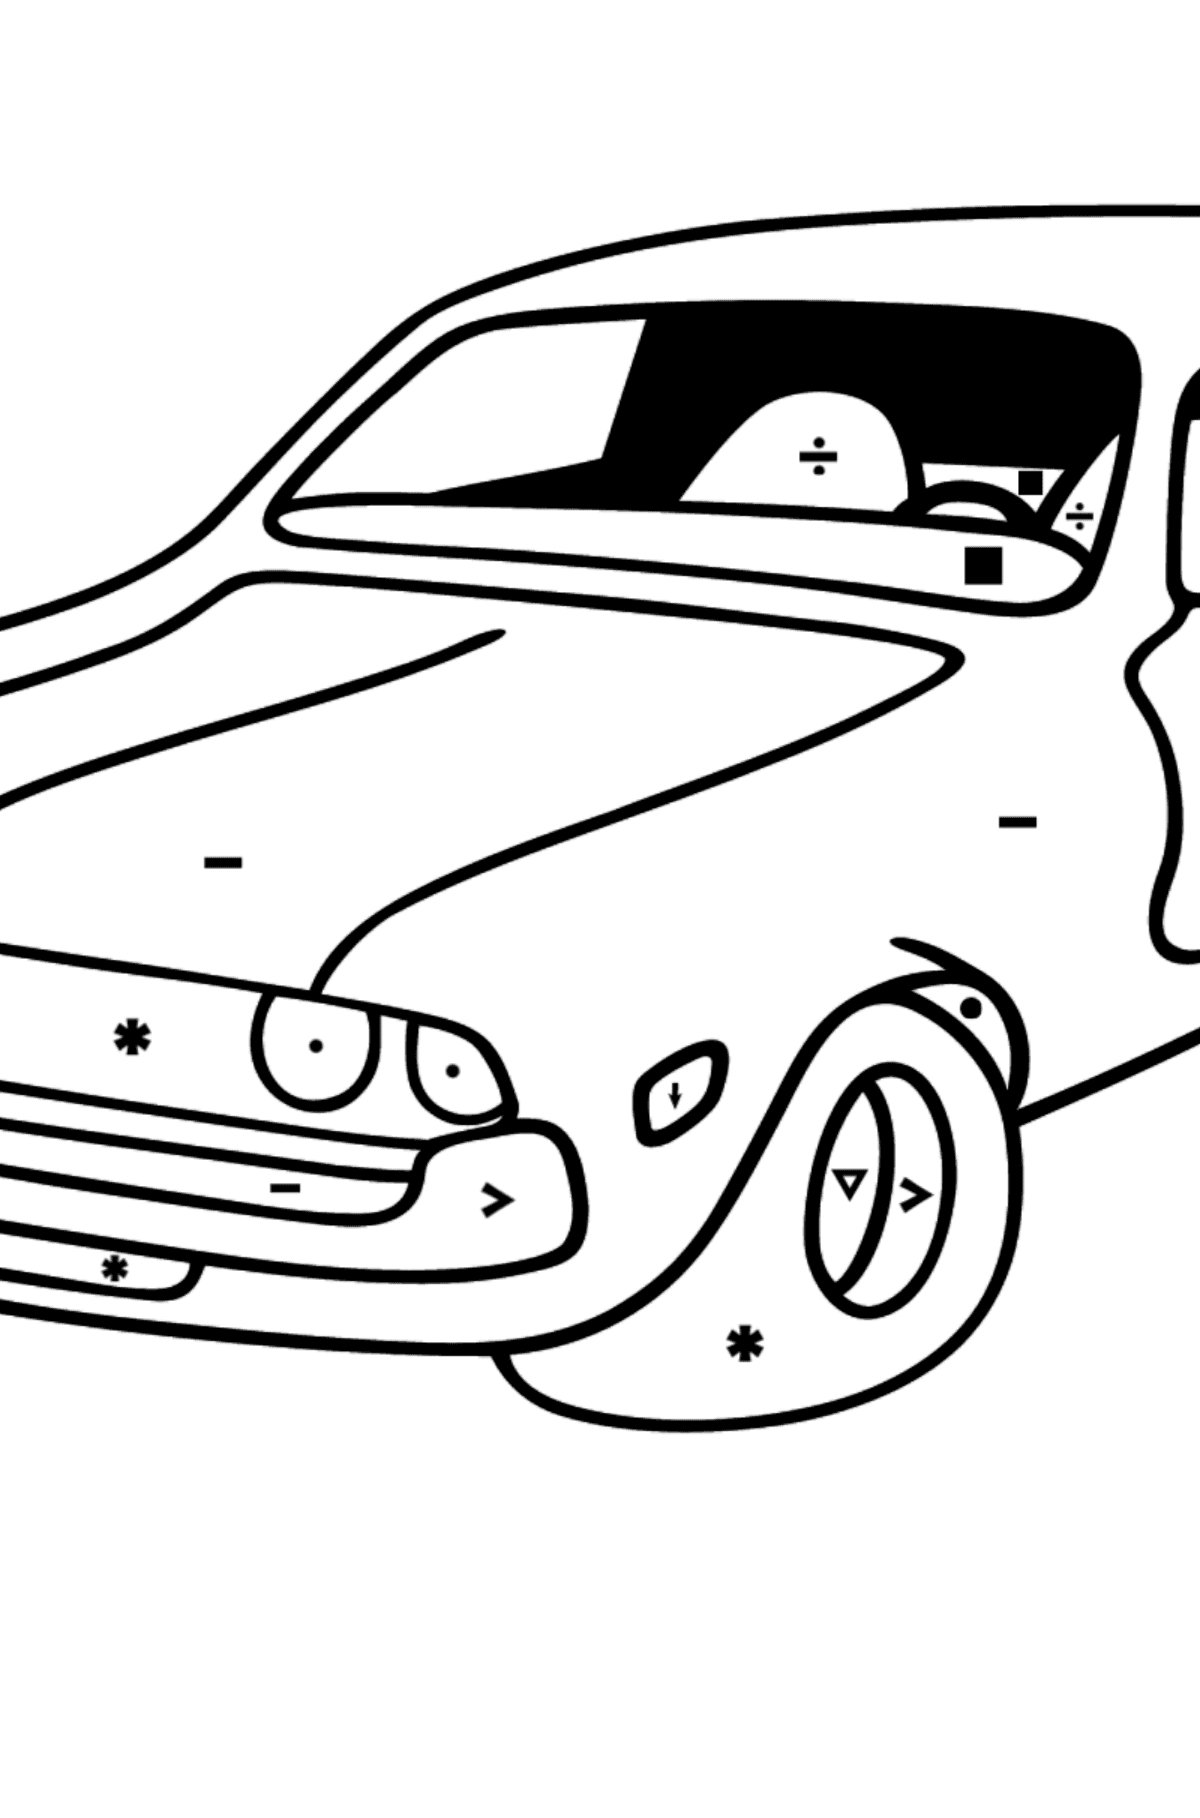 Chevrolet gray car coloring page - Coloring by Symbols for Kids